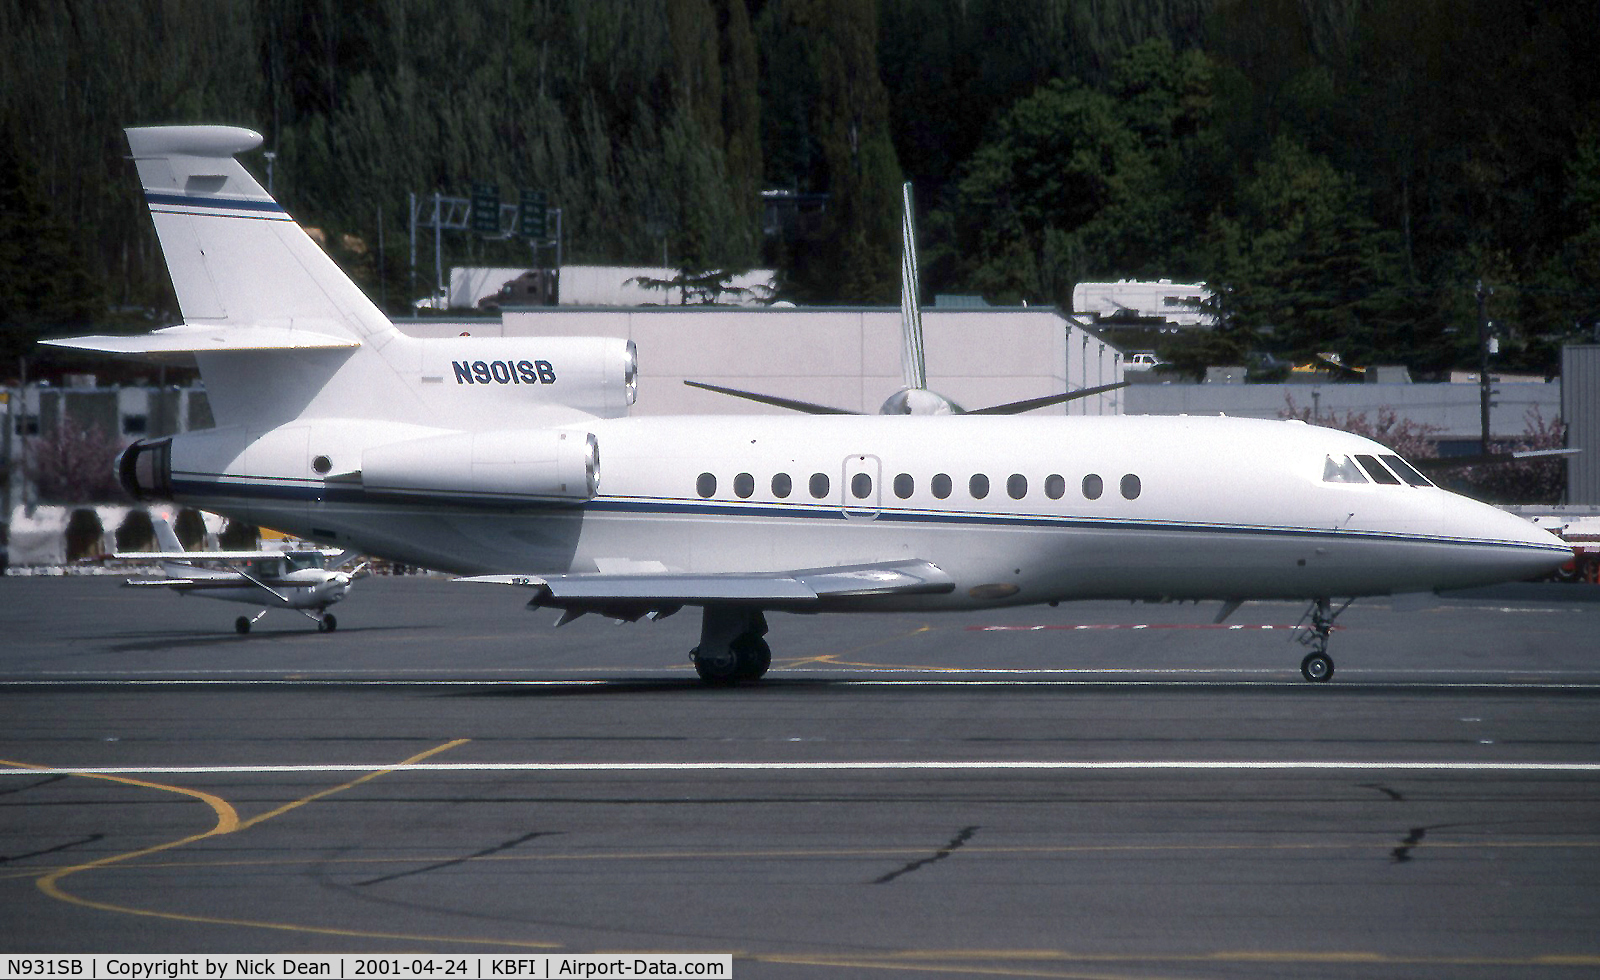 N931SB, Dassault-Breguet Falcon (Mystere) 900 C/N 33, Seen here as N901SB became N931SB as psoeted and currently registered In Benin as TY-AOM